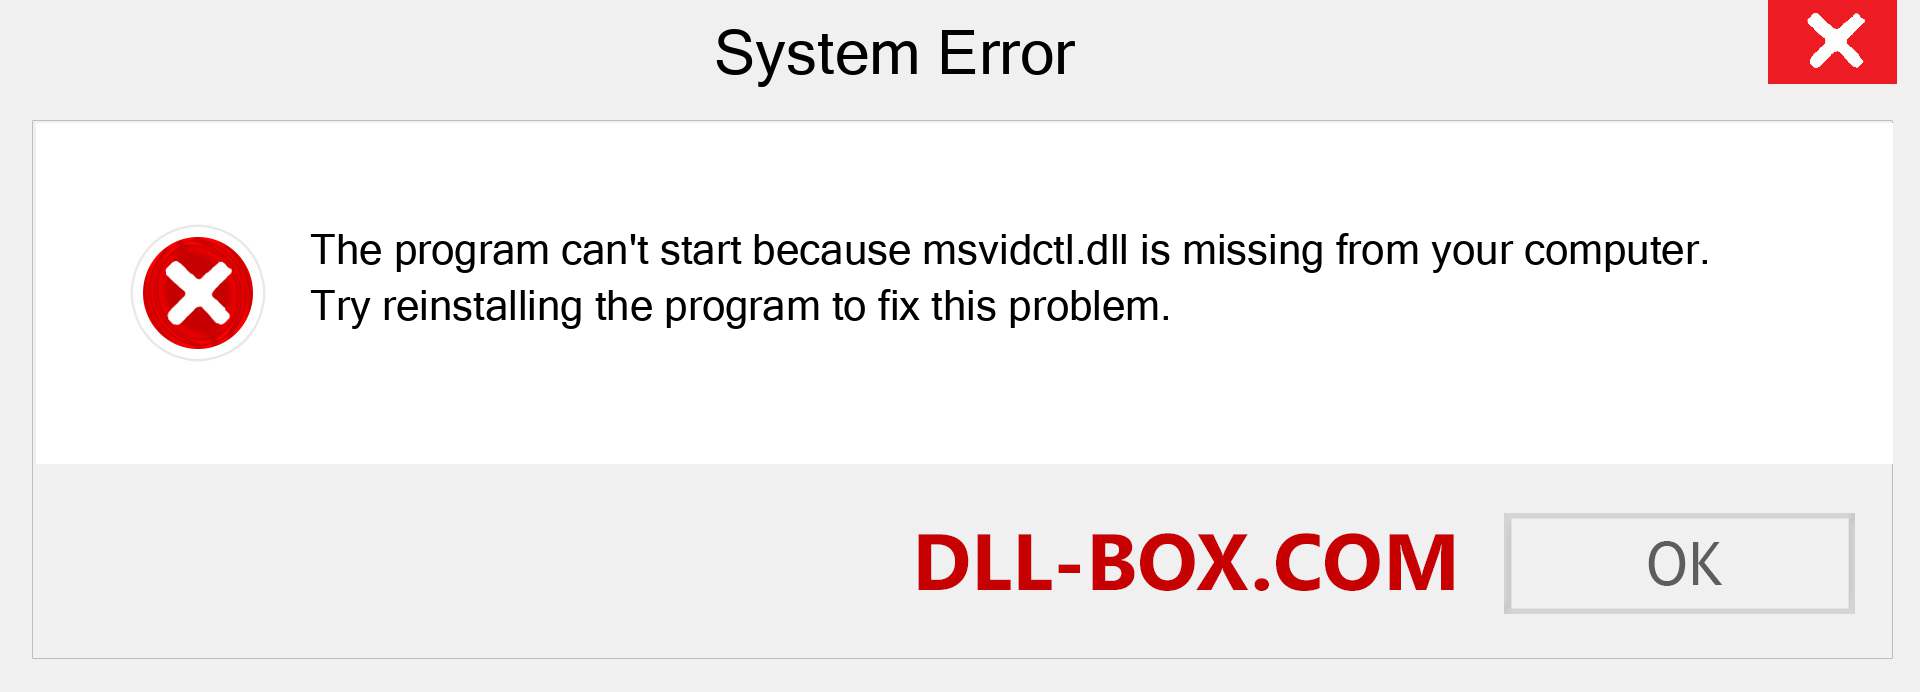  msvidctl.dll file is missing?. Download for Windows 7, 8, 10 - Fix  msvidctl dll Missing Error on Windows, photos, images